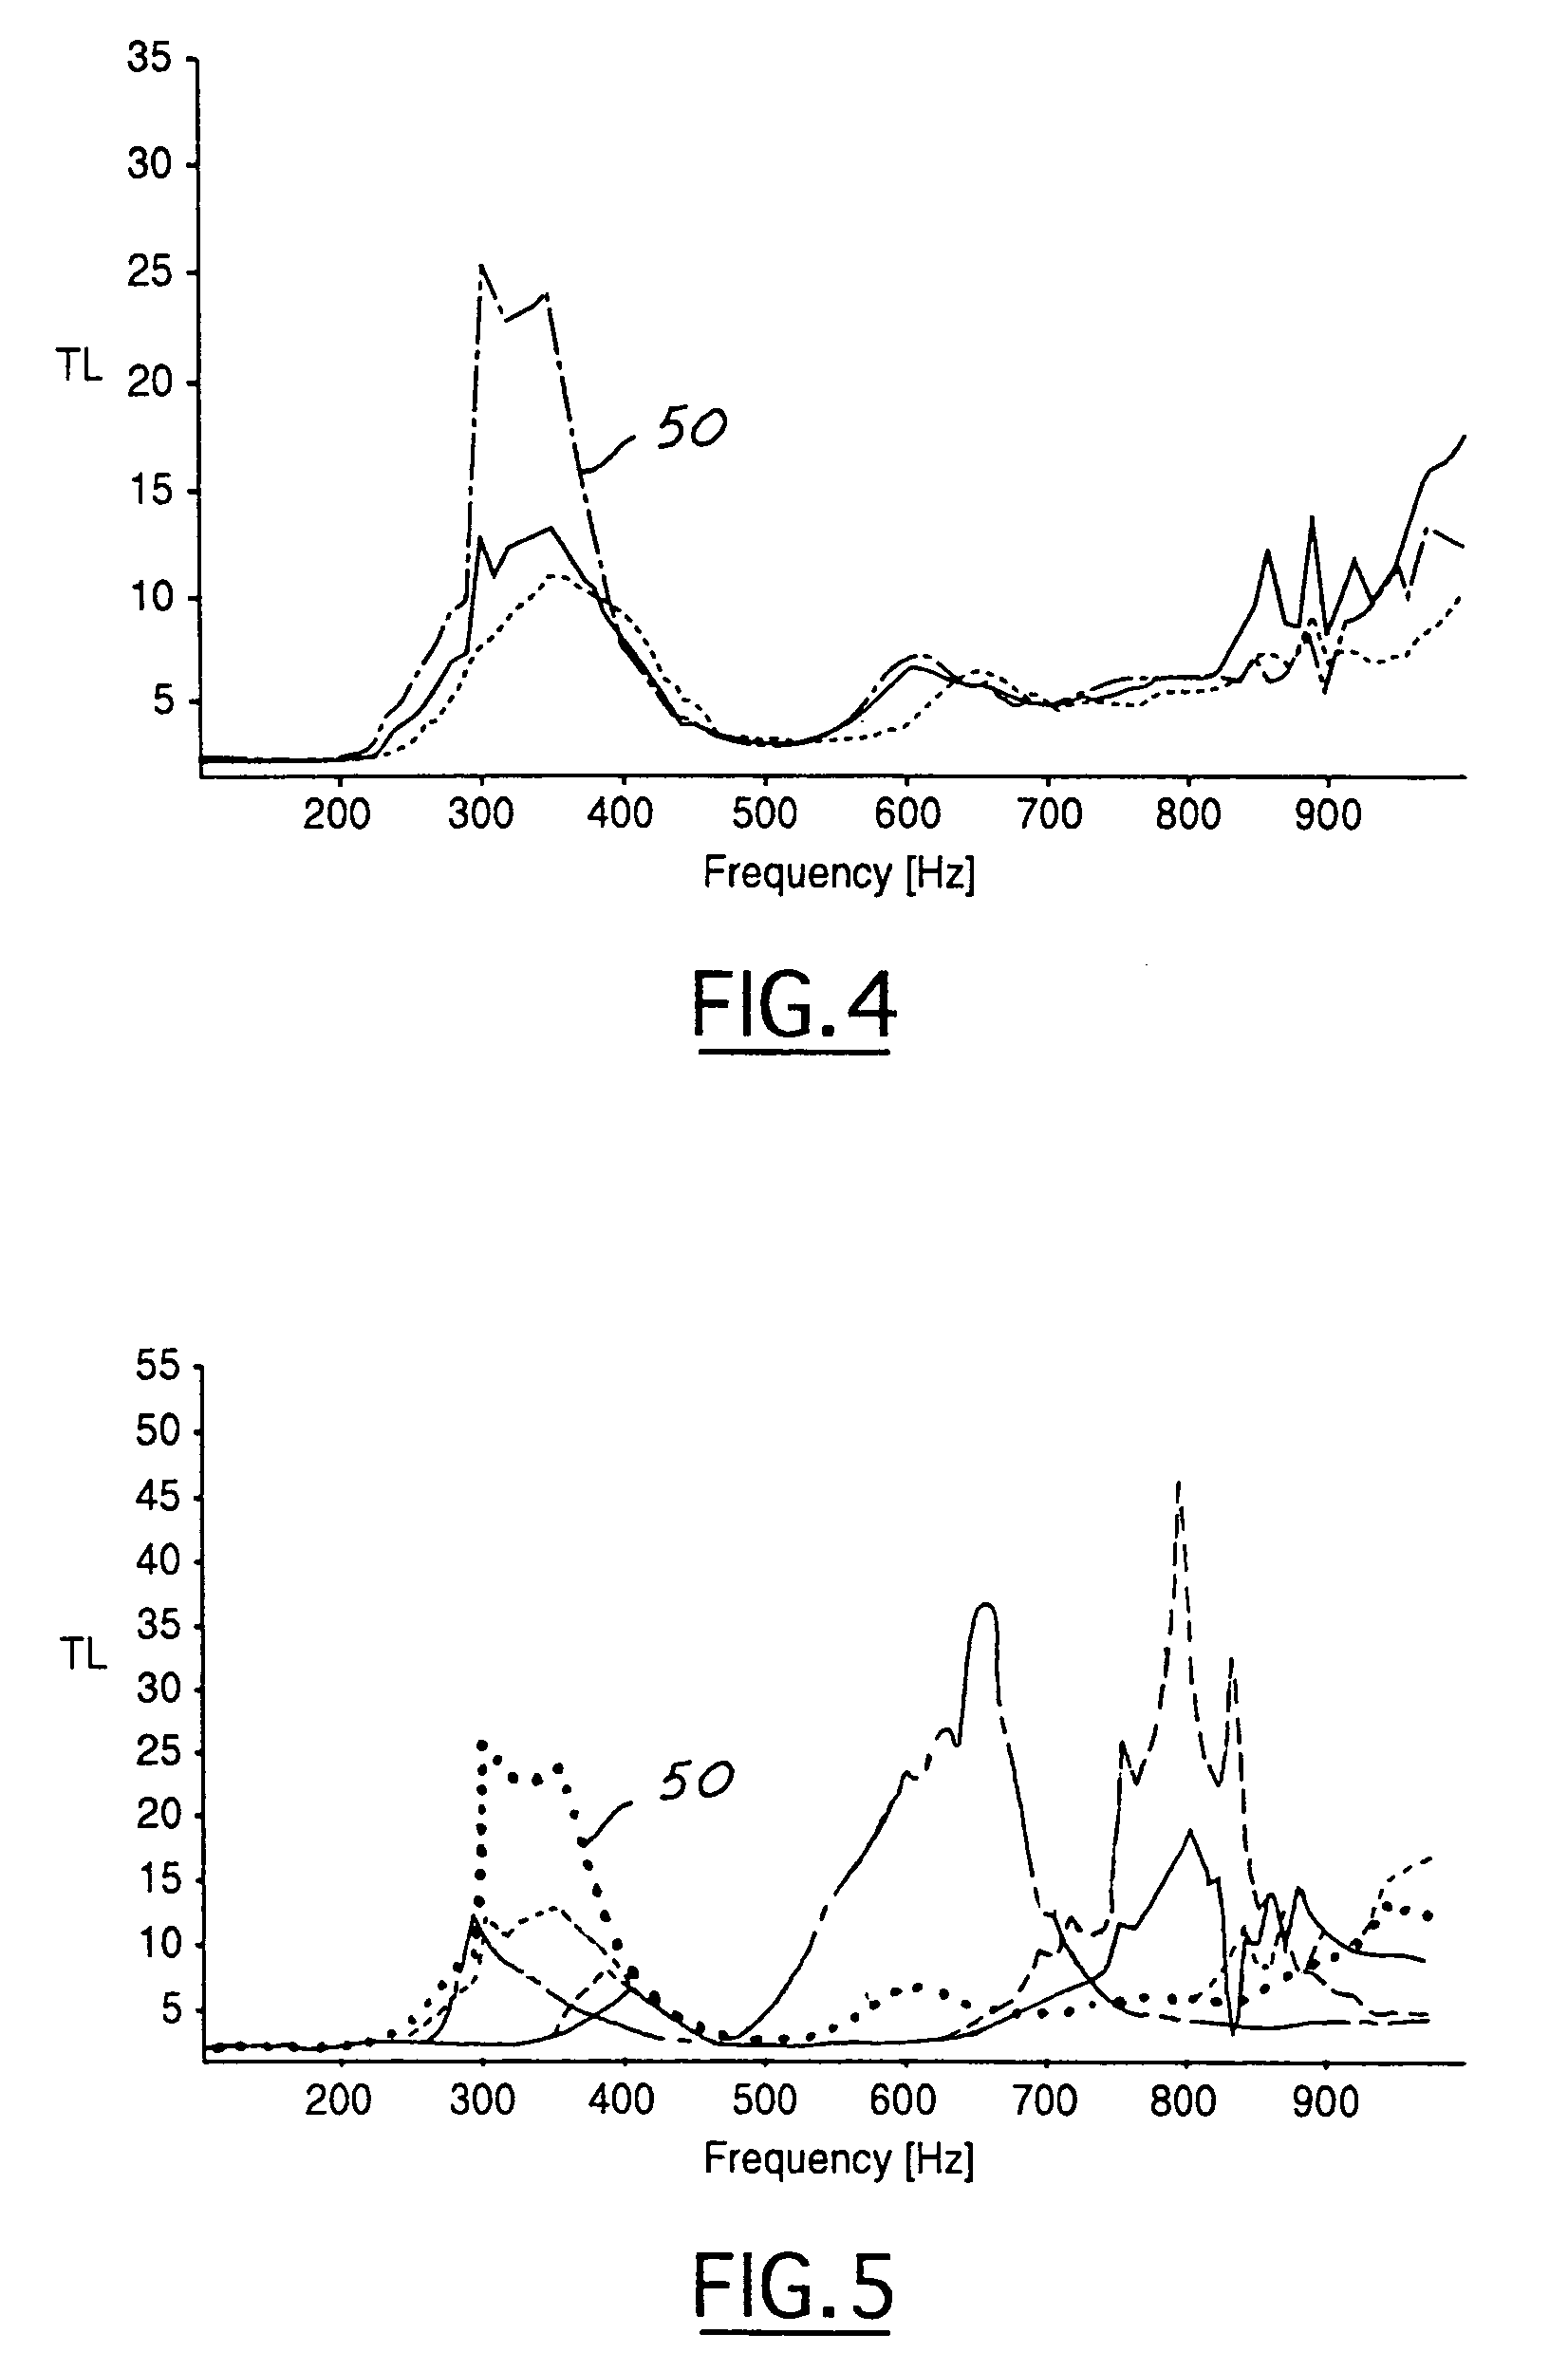 Fluid-borne noise suppression in an automotive power steering system